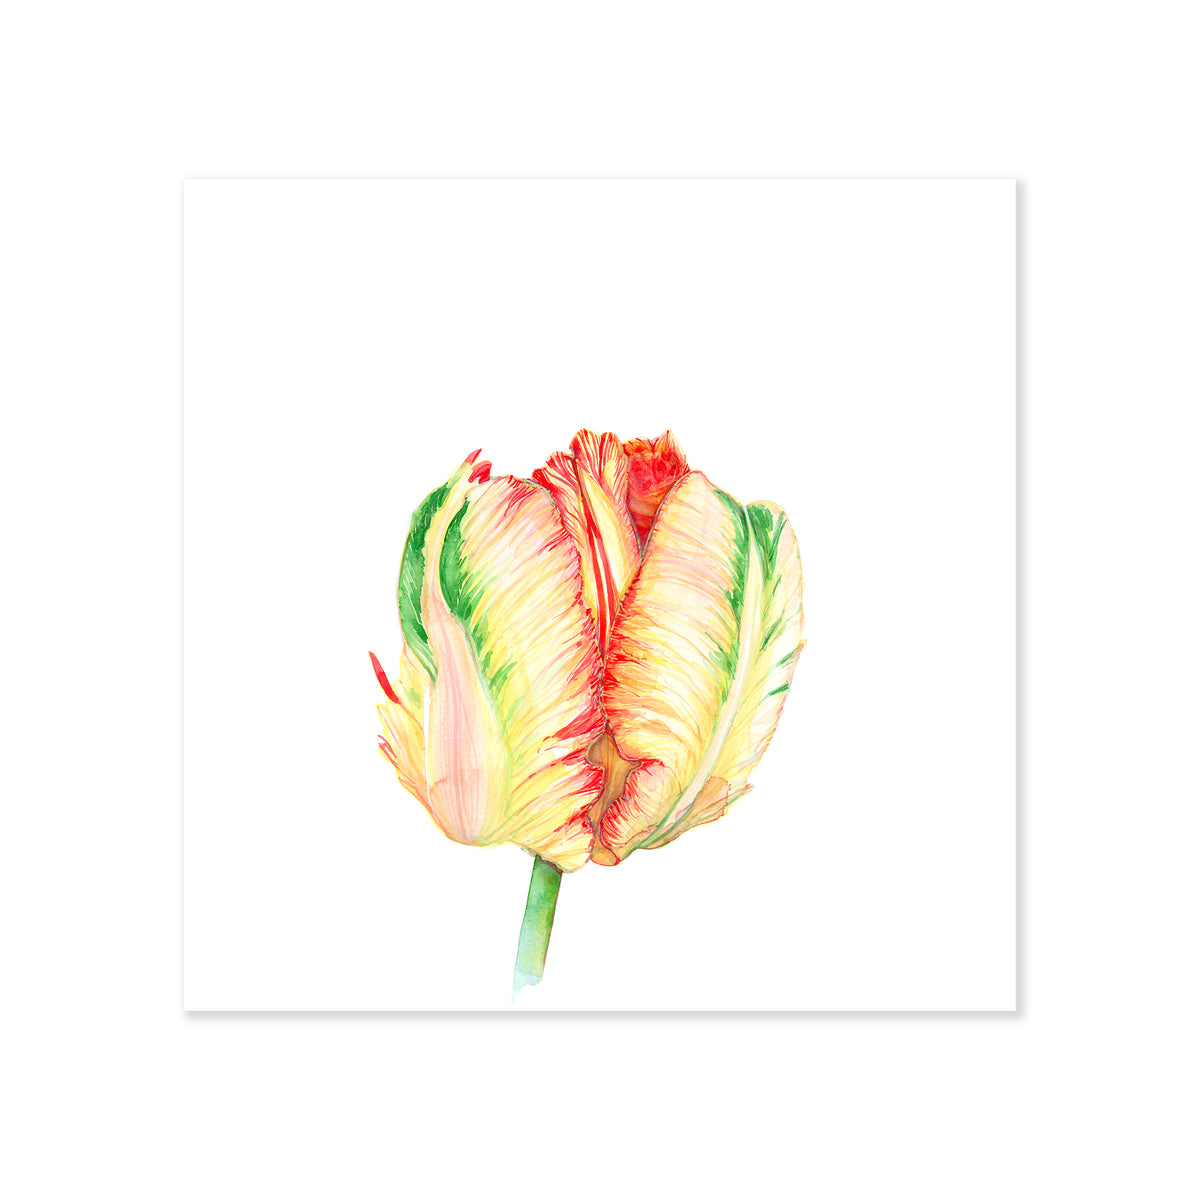 A fine art print illustrating a tulip bulb featuring yellow red and green hues painted with watercolors on a soft white background